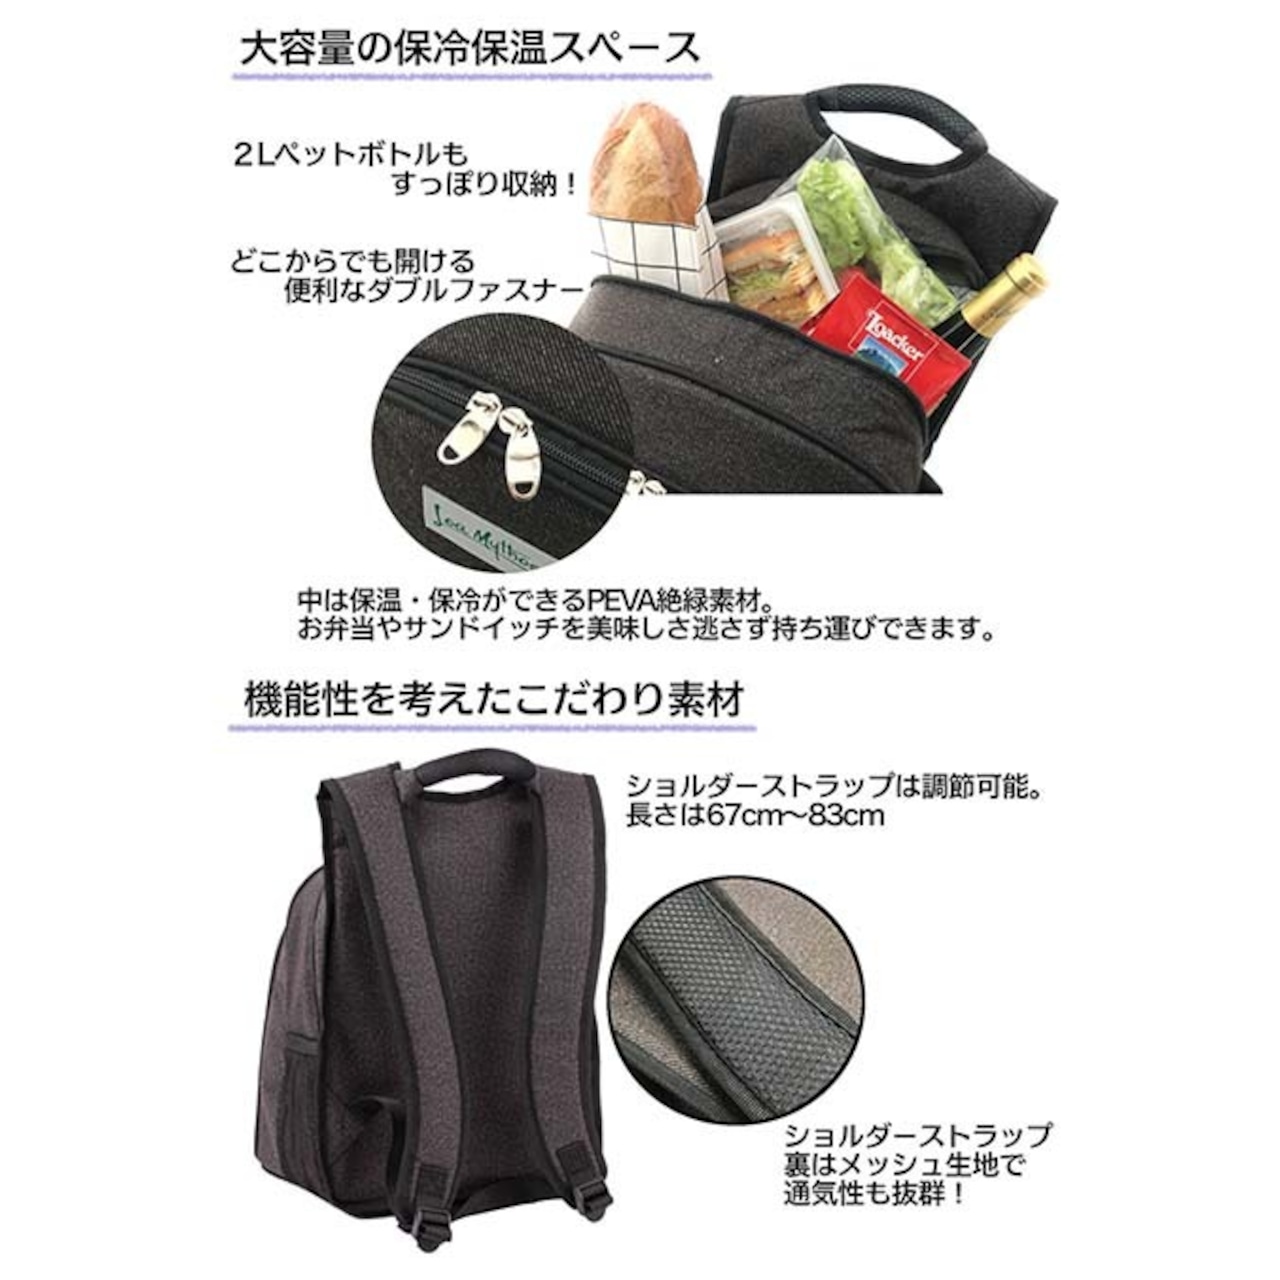 LoaMythos(ロアミトス) Compact Picnic Ruck（4人用） lm1001421 ピクニック バッグ